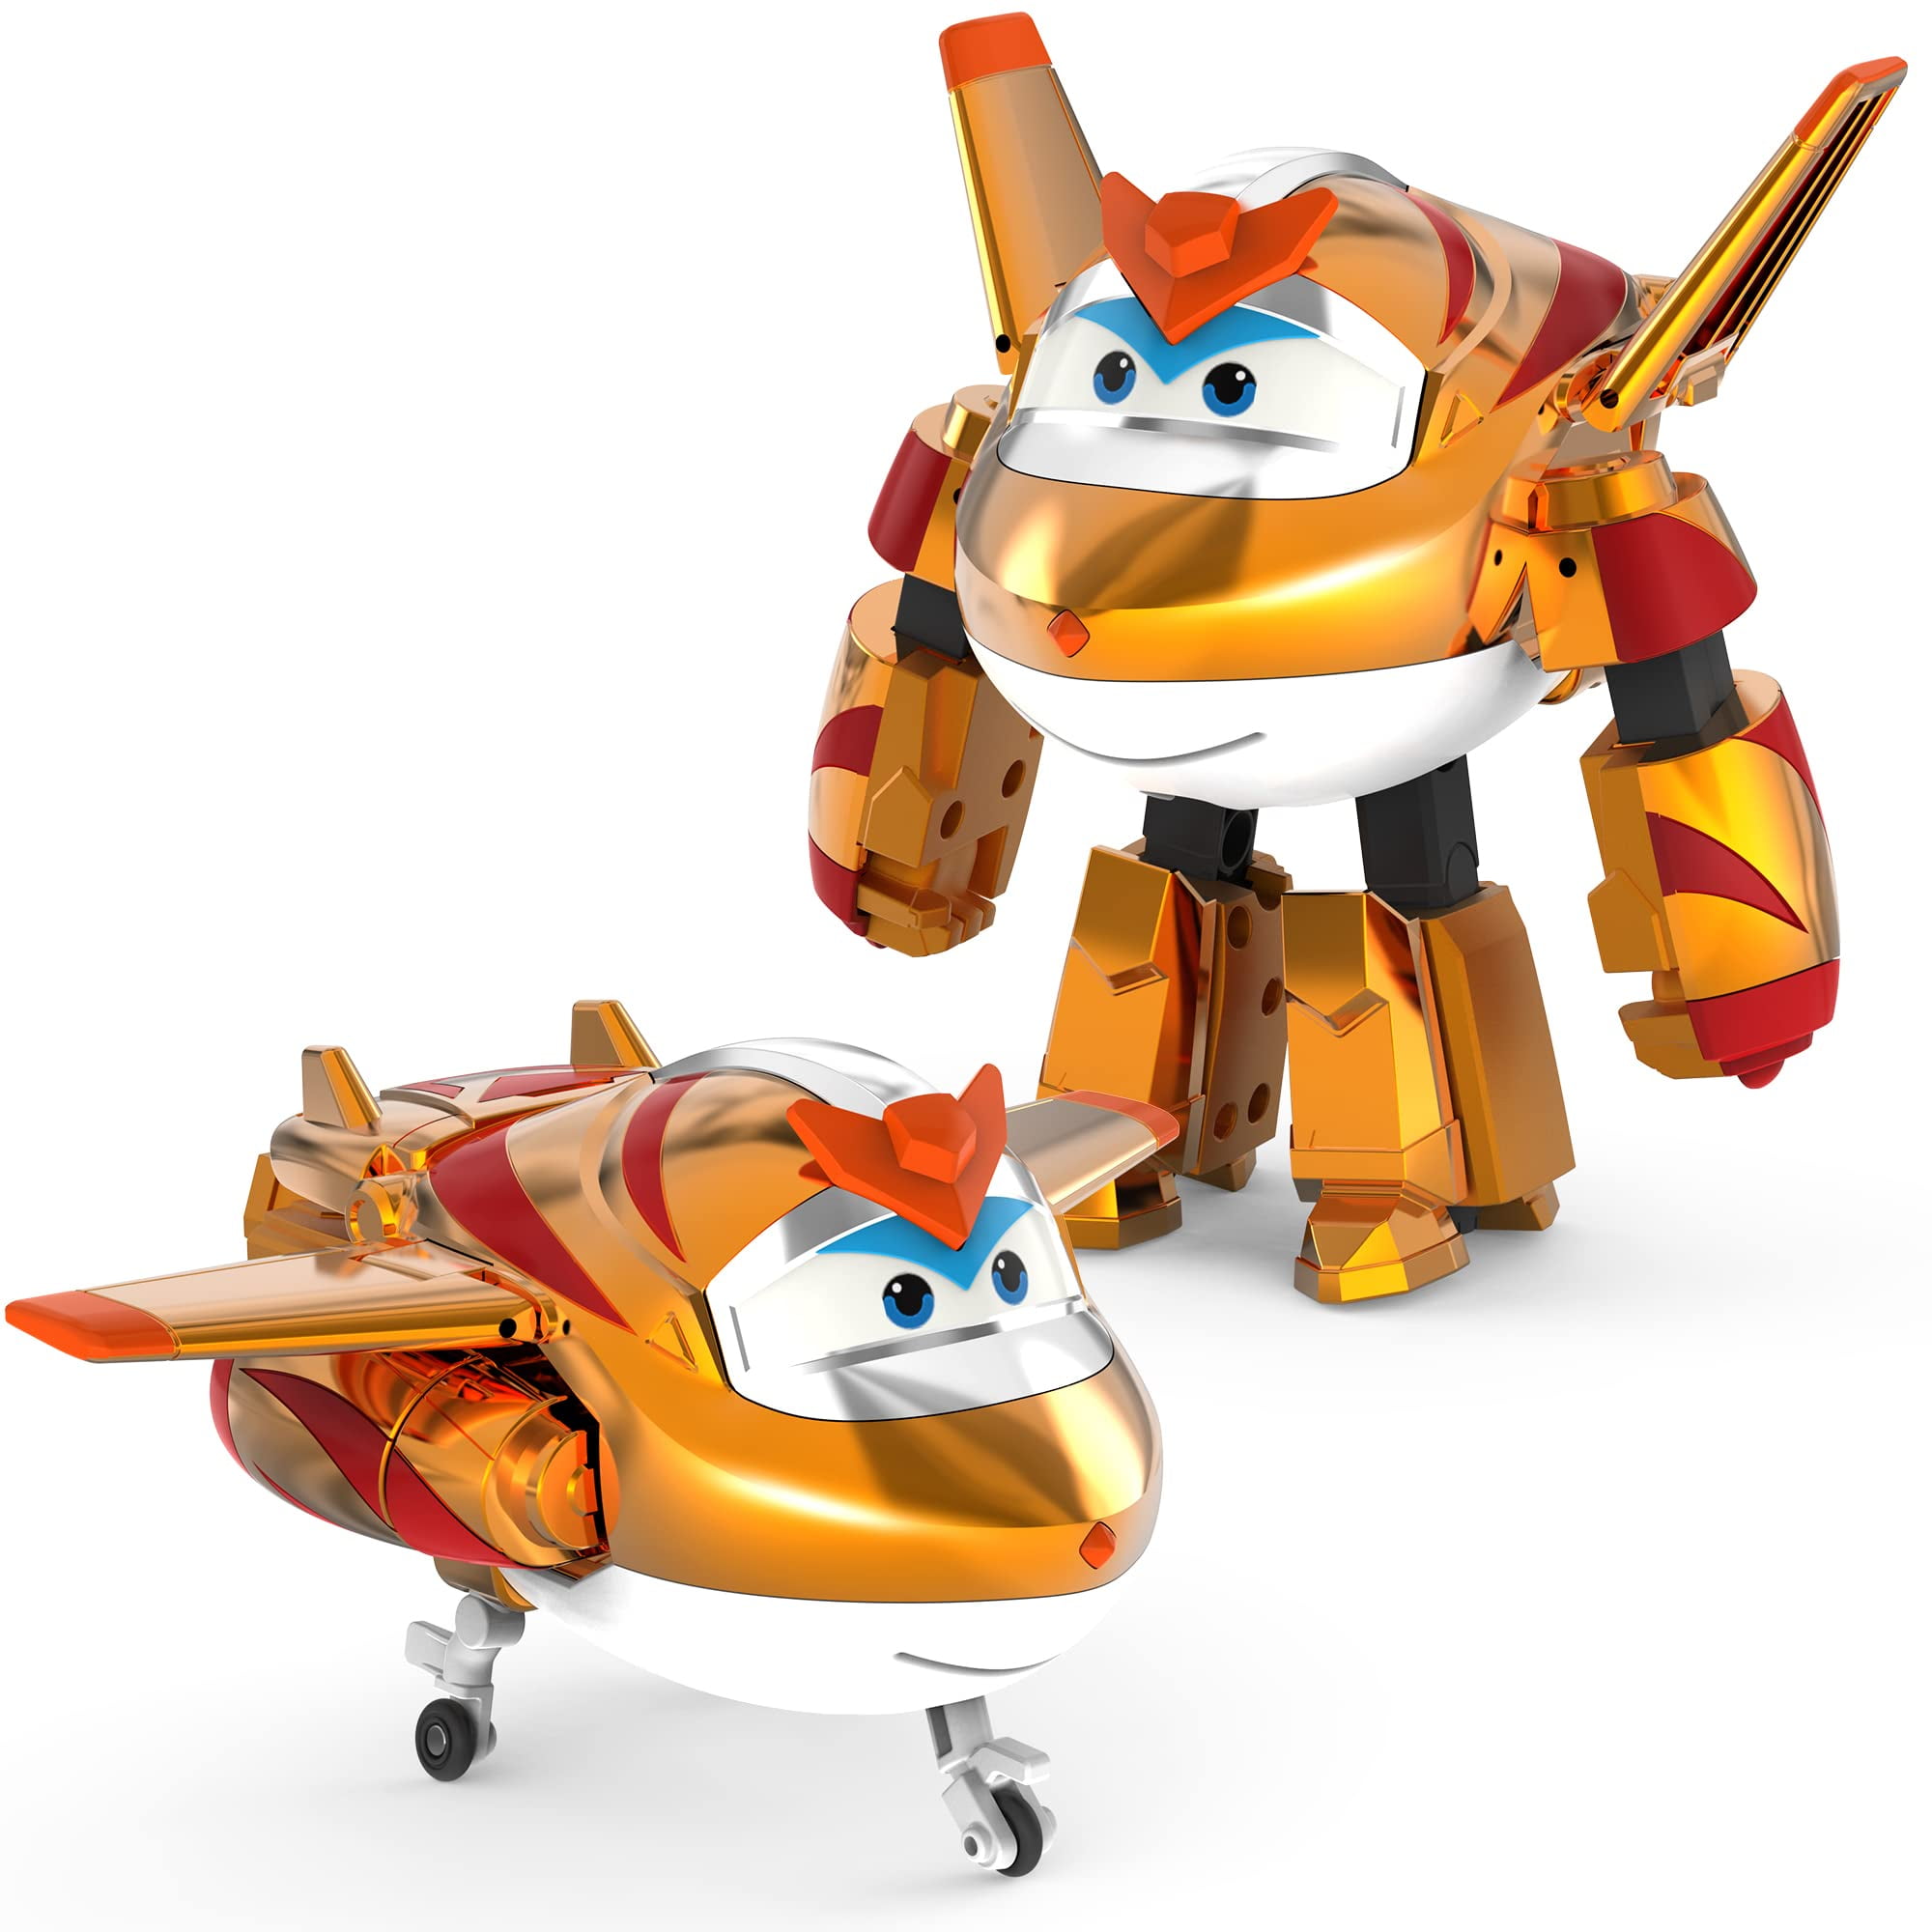 Super Wings 5 Transforming Golden Boy Airplane Toys, Vehicle Action  Figure, Superwings Transforming Plane to Robot, Flying Toy Vehicle Playset,  Gifts Toys for Kids, Age 3 and Up, Gold 